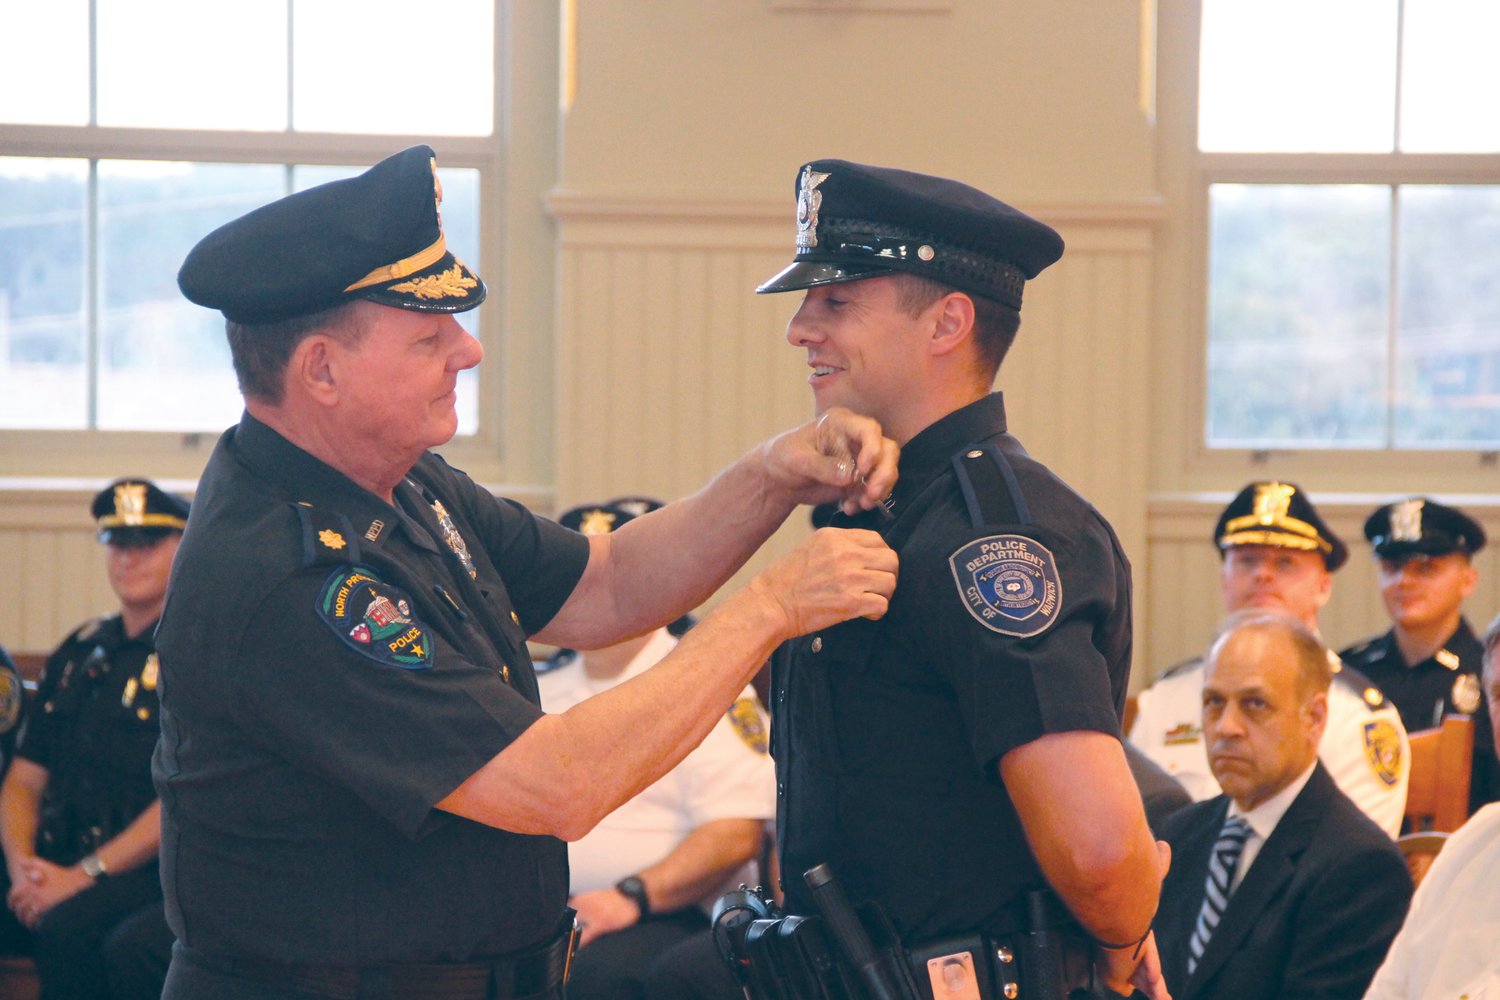 FOLLOWING HIS STEPS: Officer Nicholas DeLuca is pinned by his Father, Major William Deluca who has retired from the North Providence Police Department.